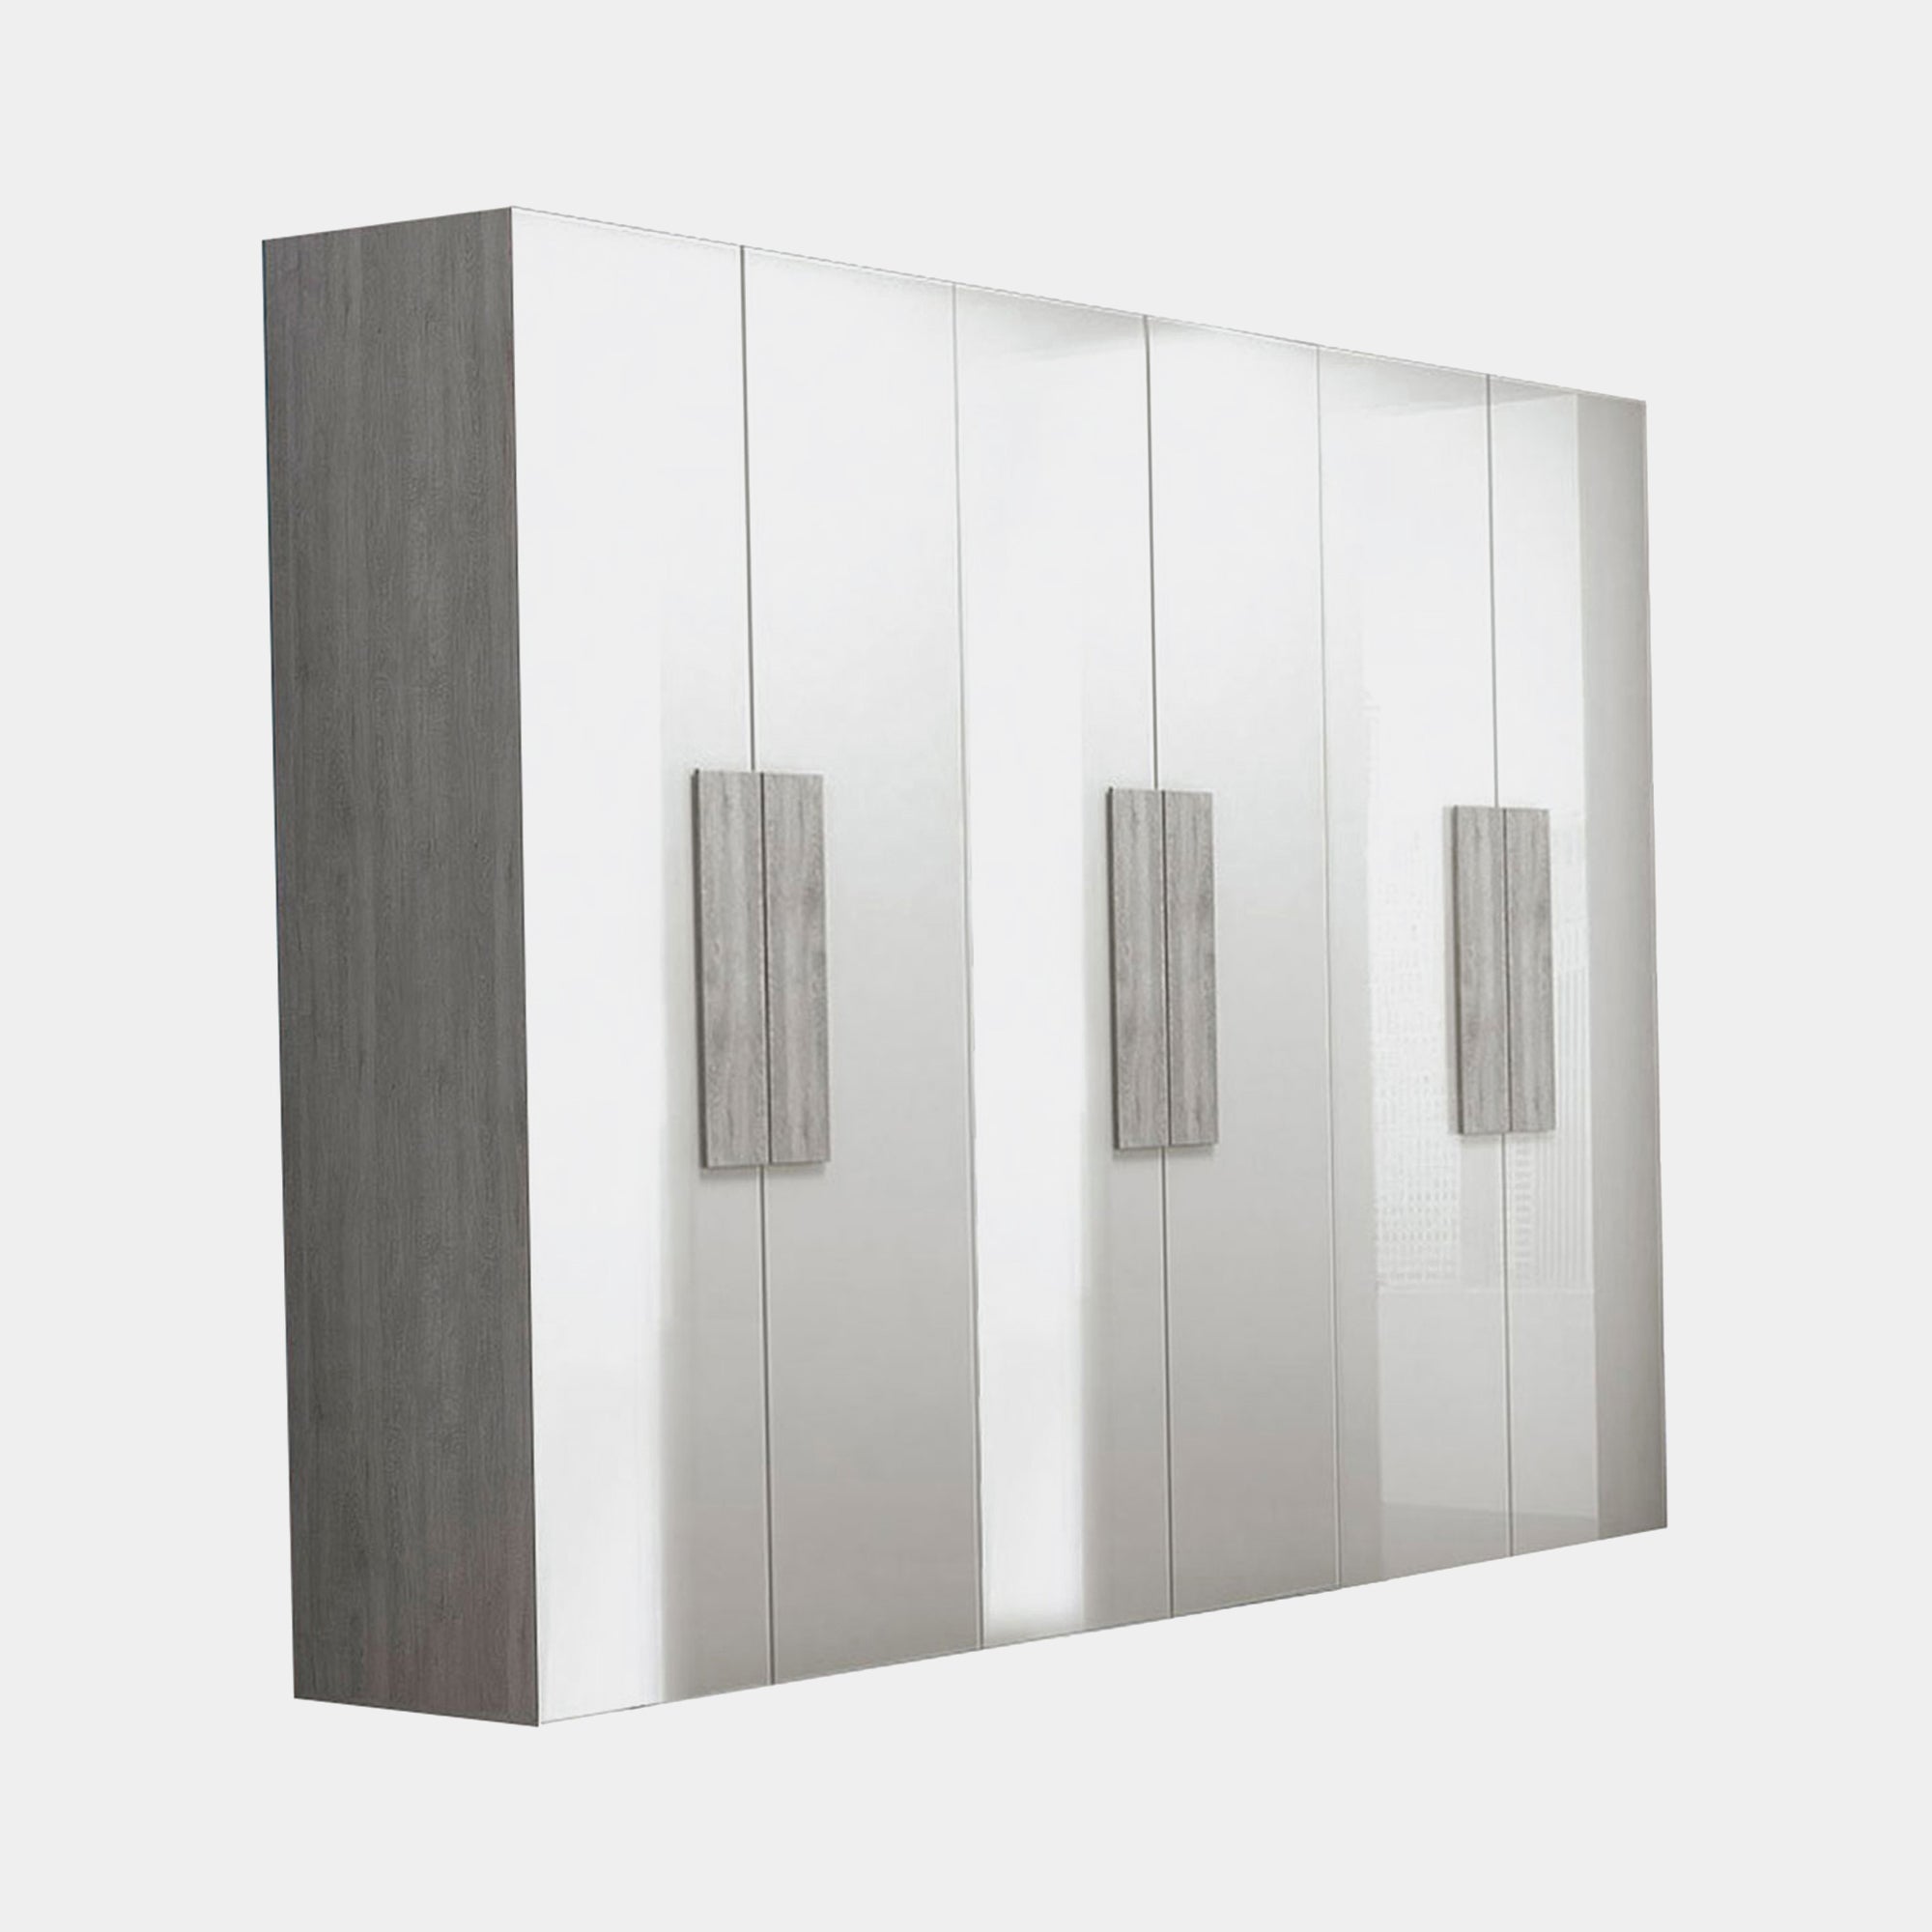 6 Doors Wardrobe Titanio/Silver Ash (Self Assembly Required)